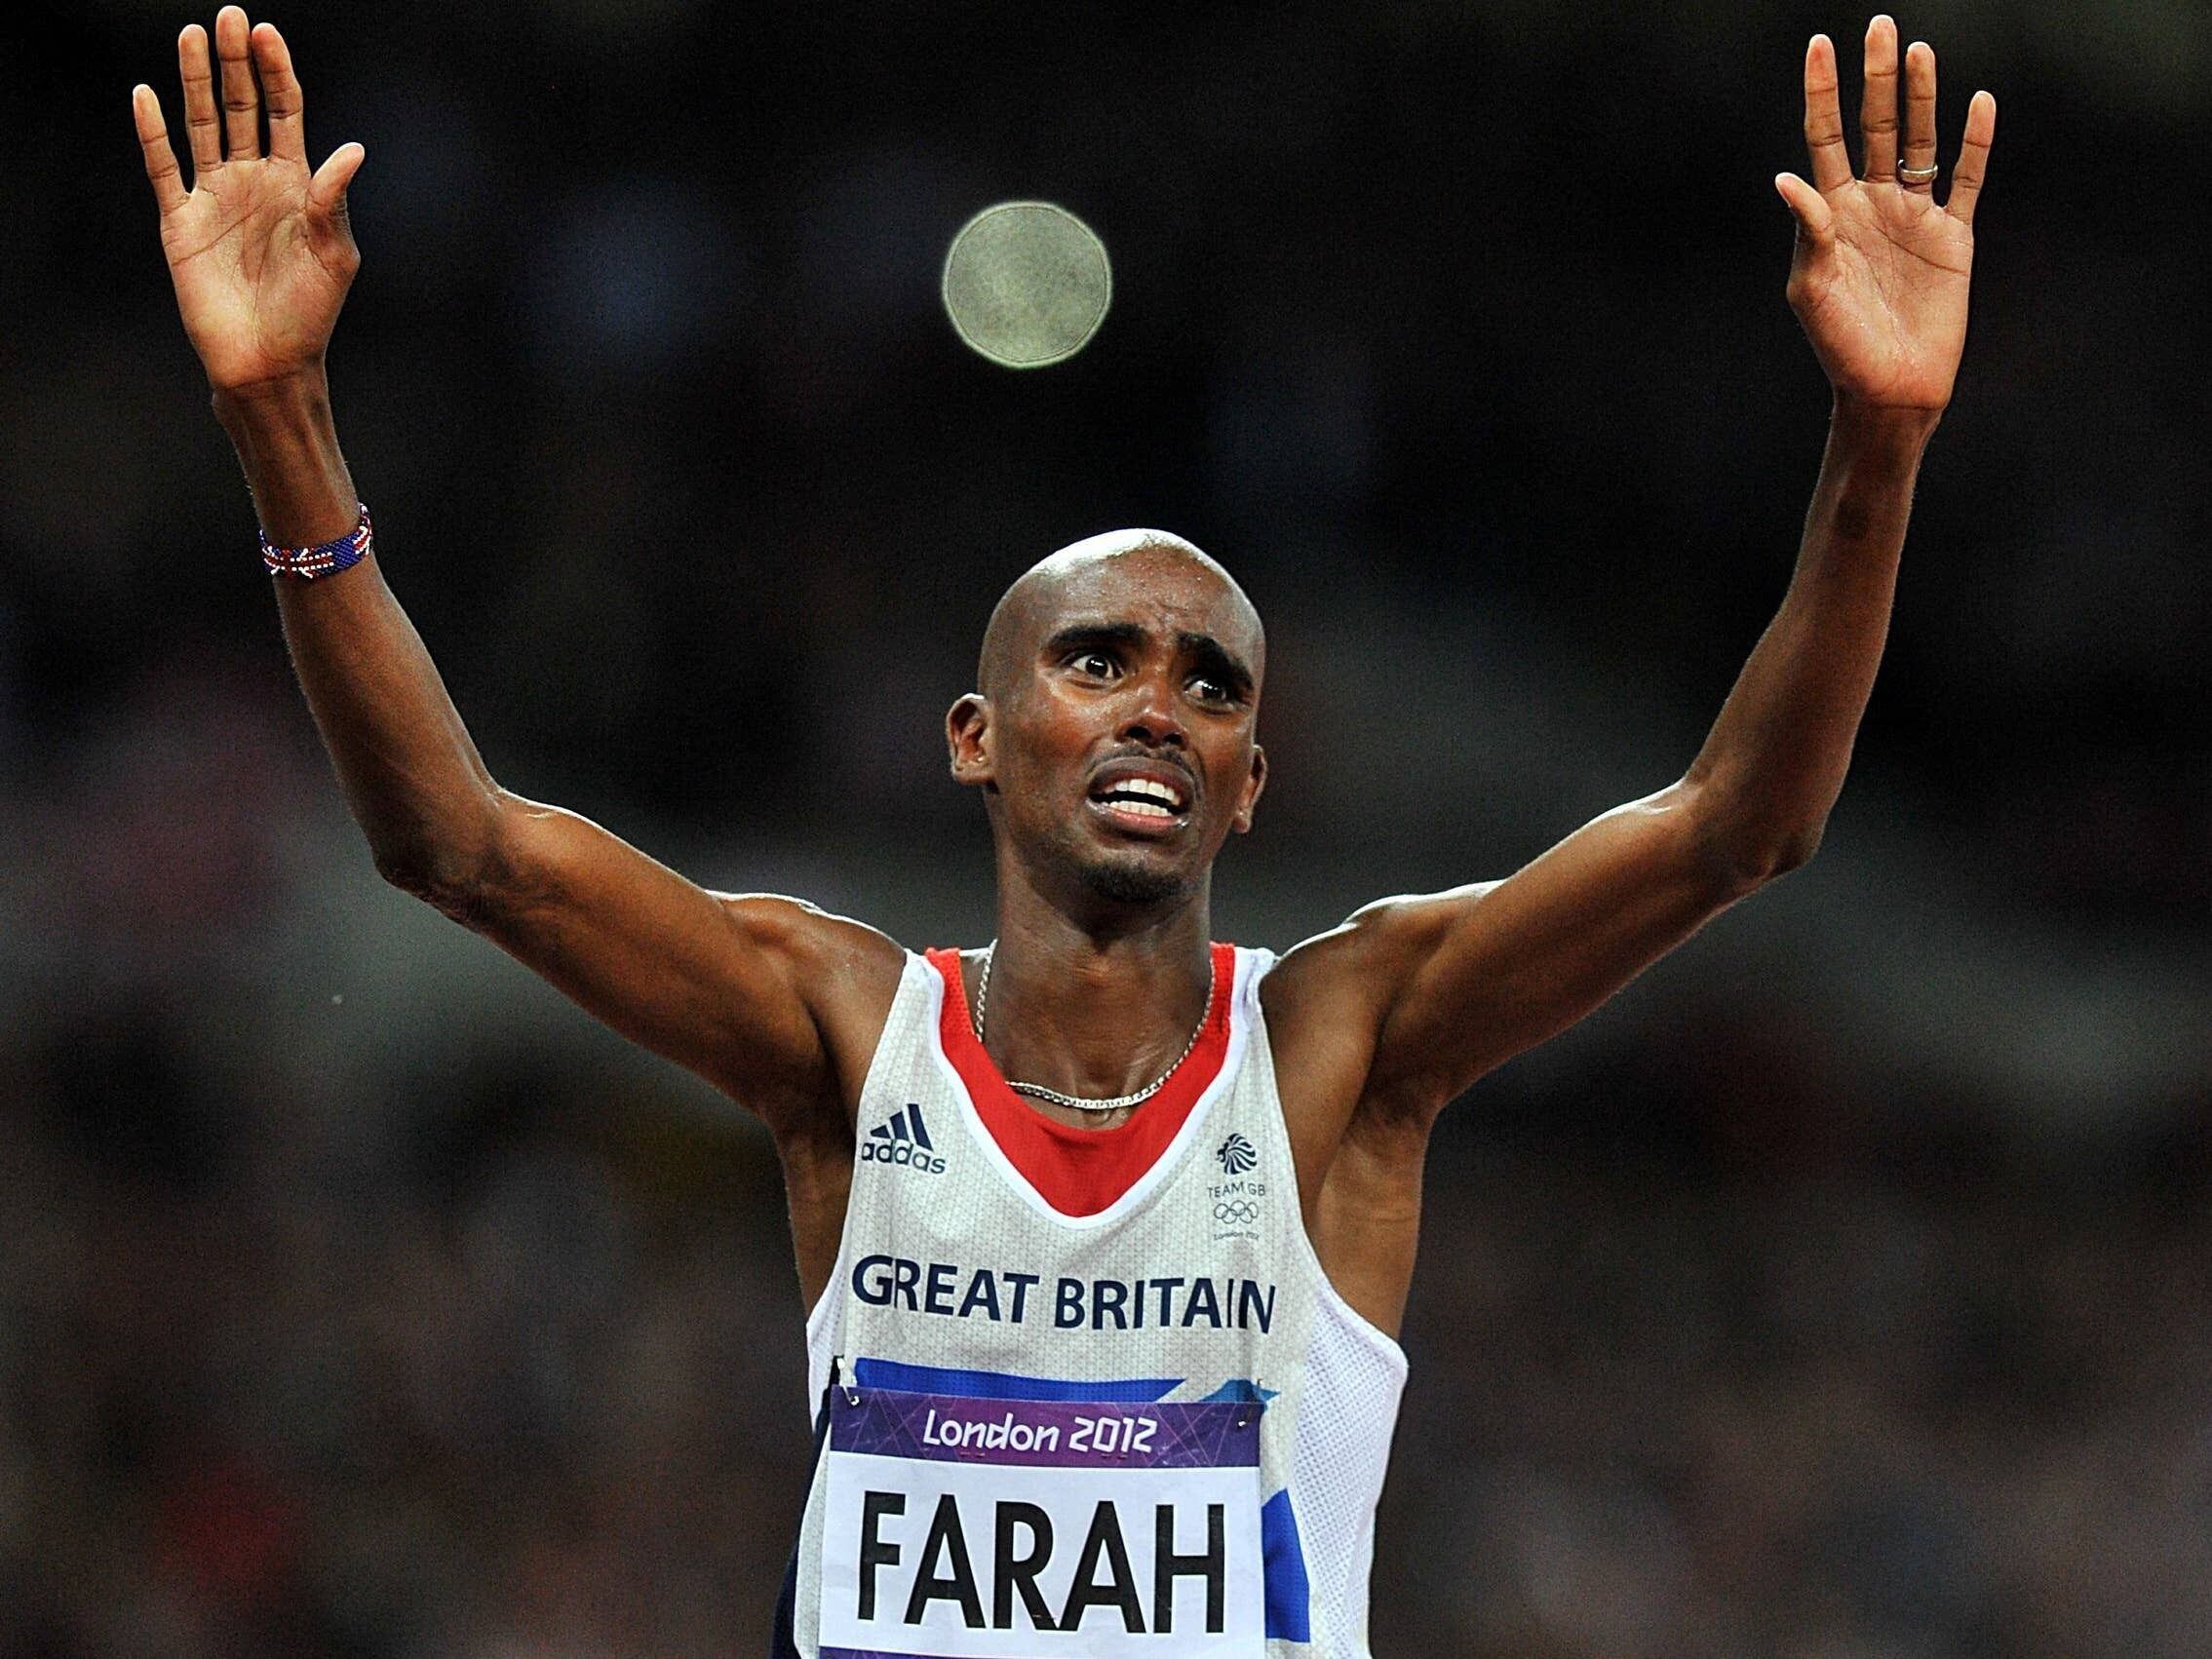 Sir Mo Farah ‘relieved’ that UK Home Office will take no action against him